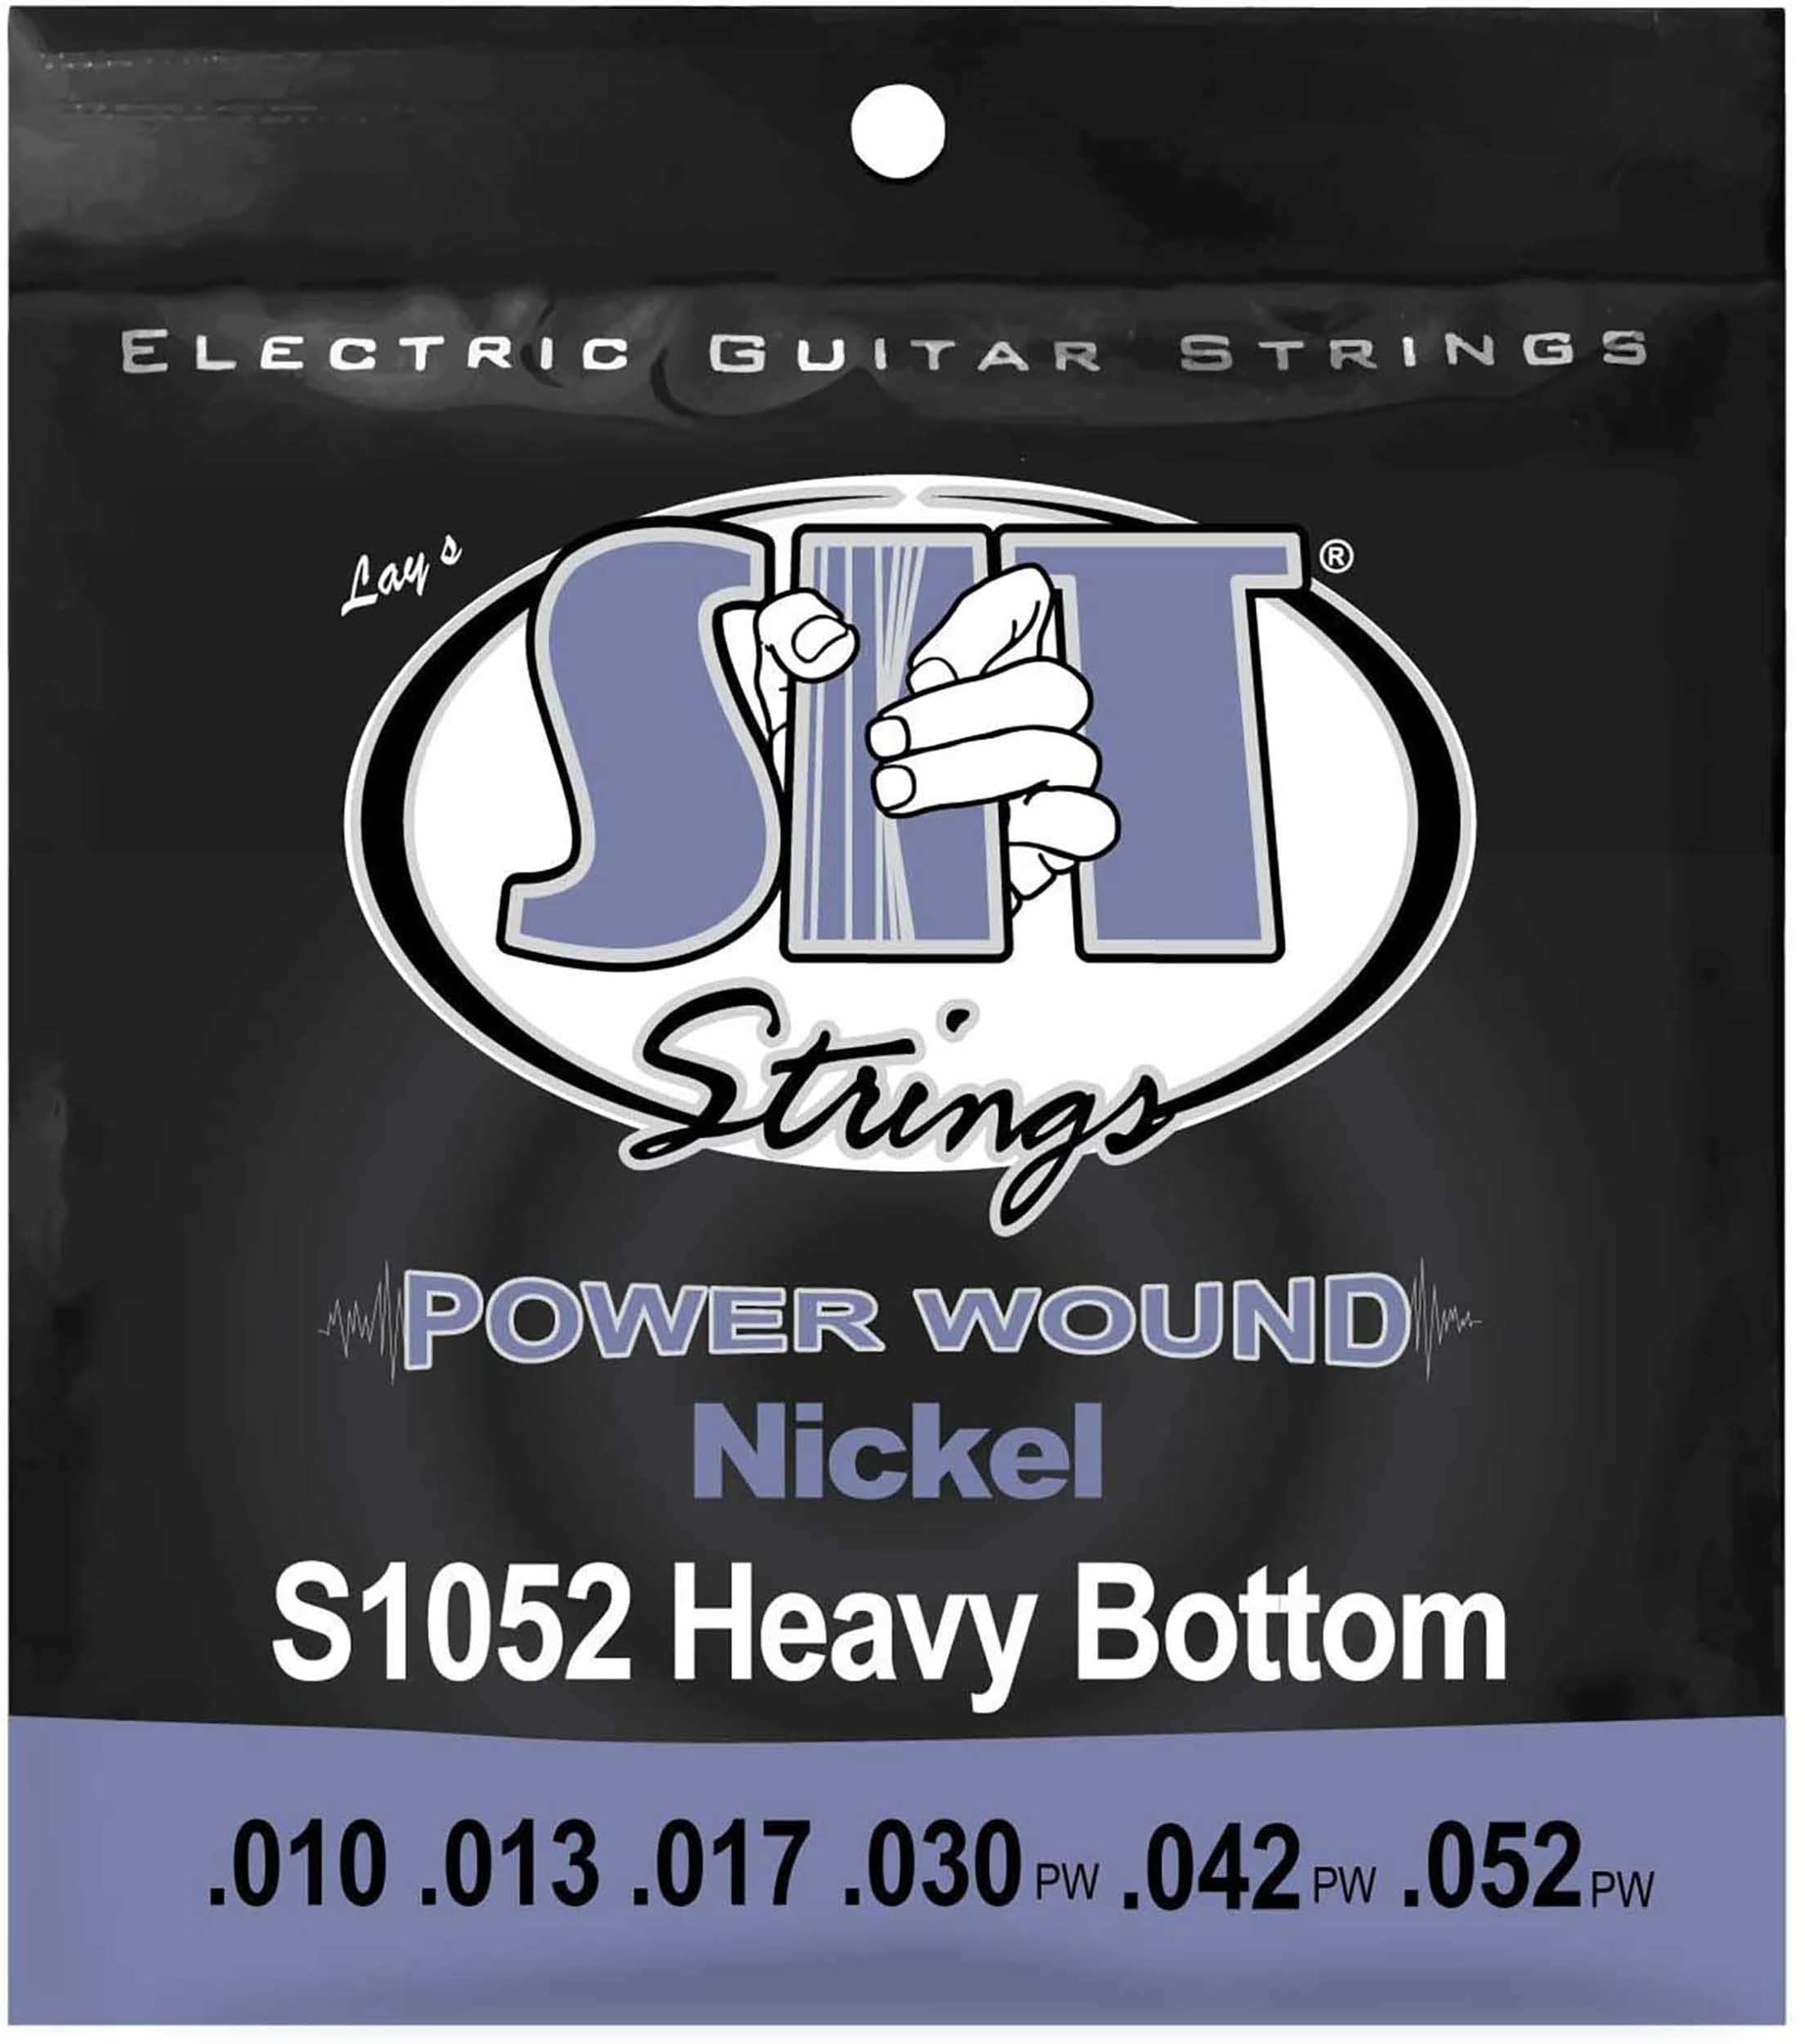 S.I.T. String S1052, Heavy Bottom Power Wound Nickel Electric Guitar String